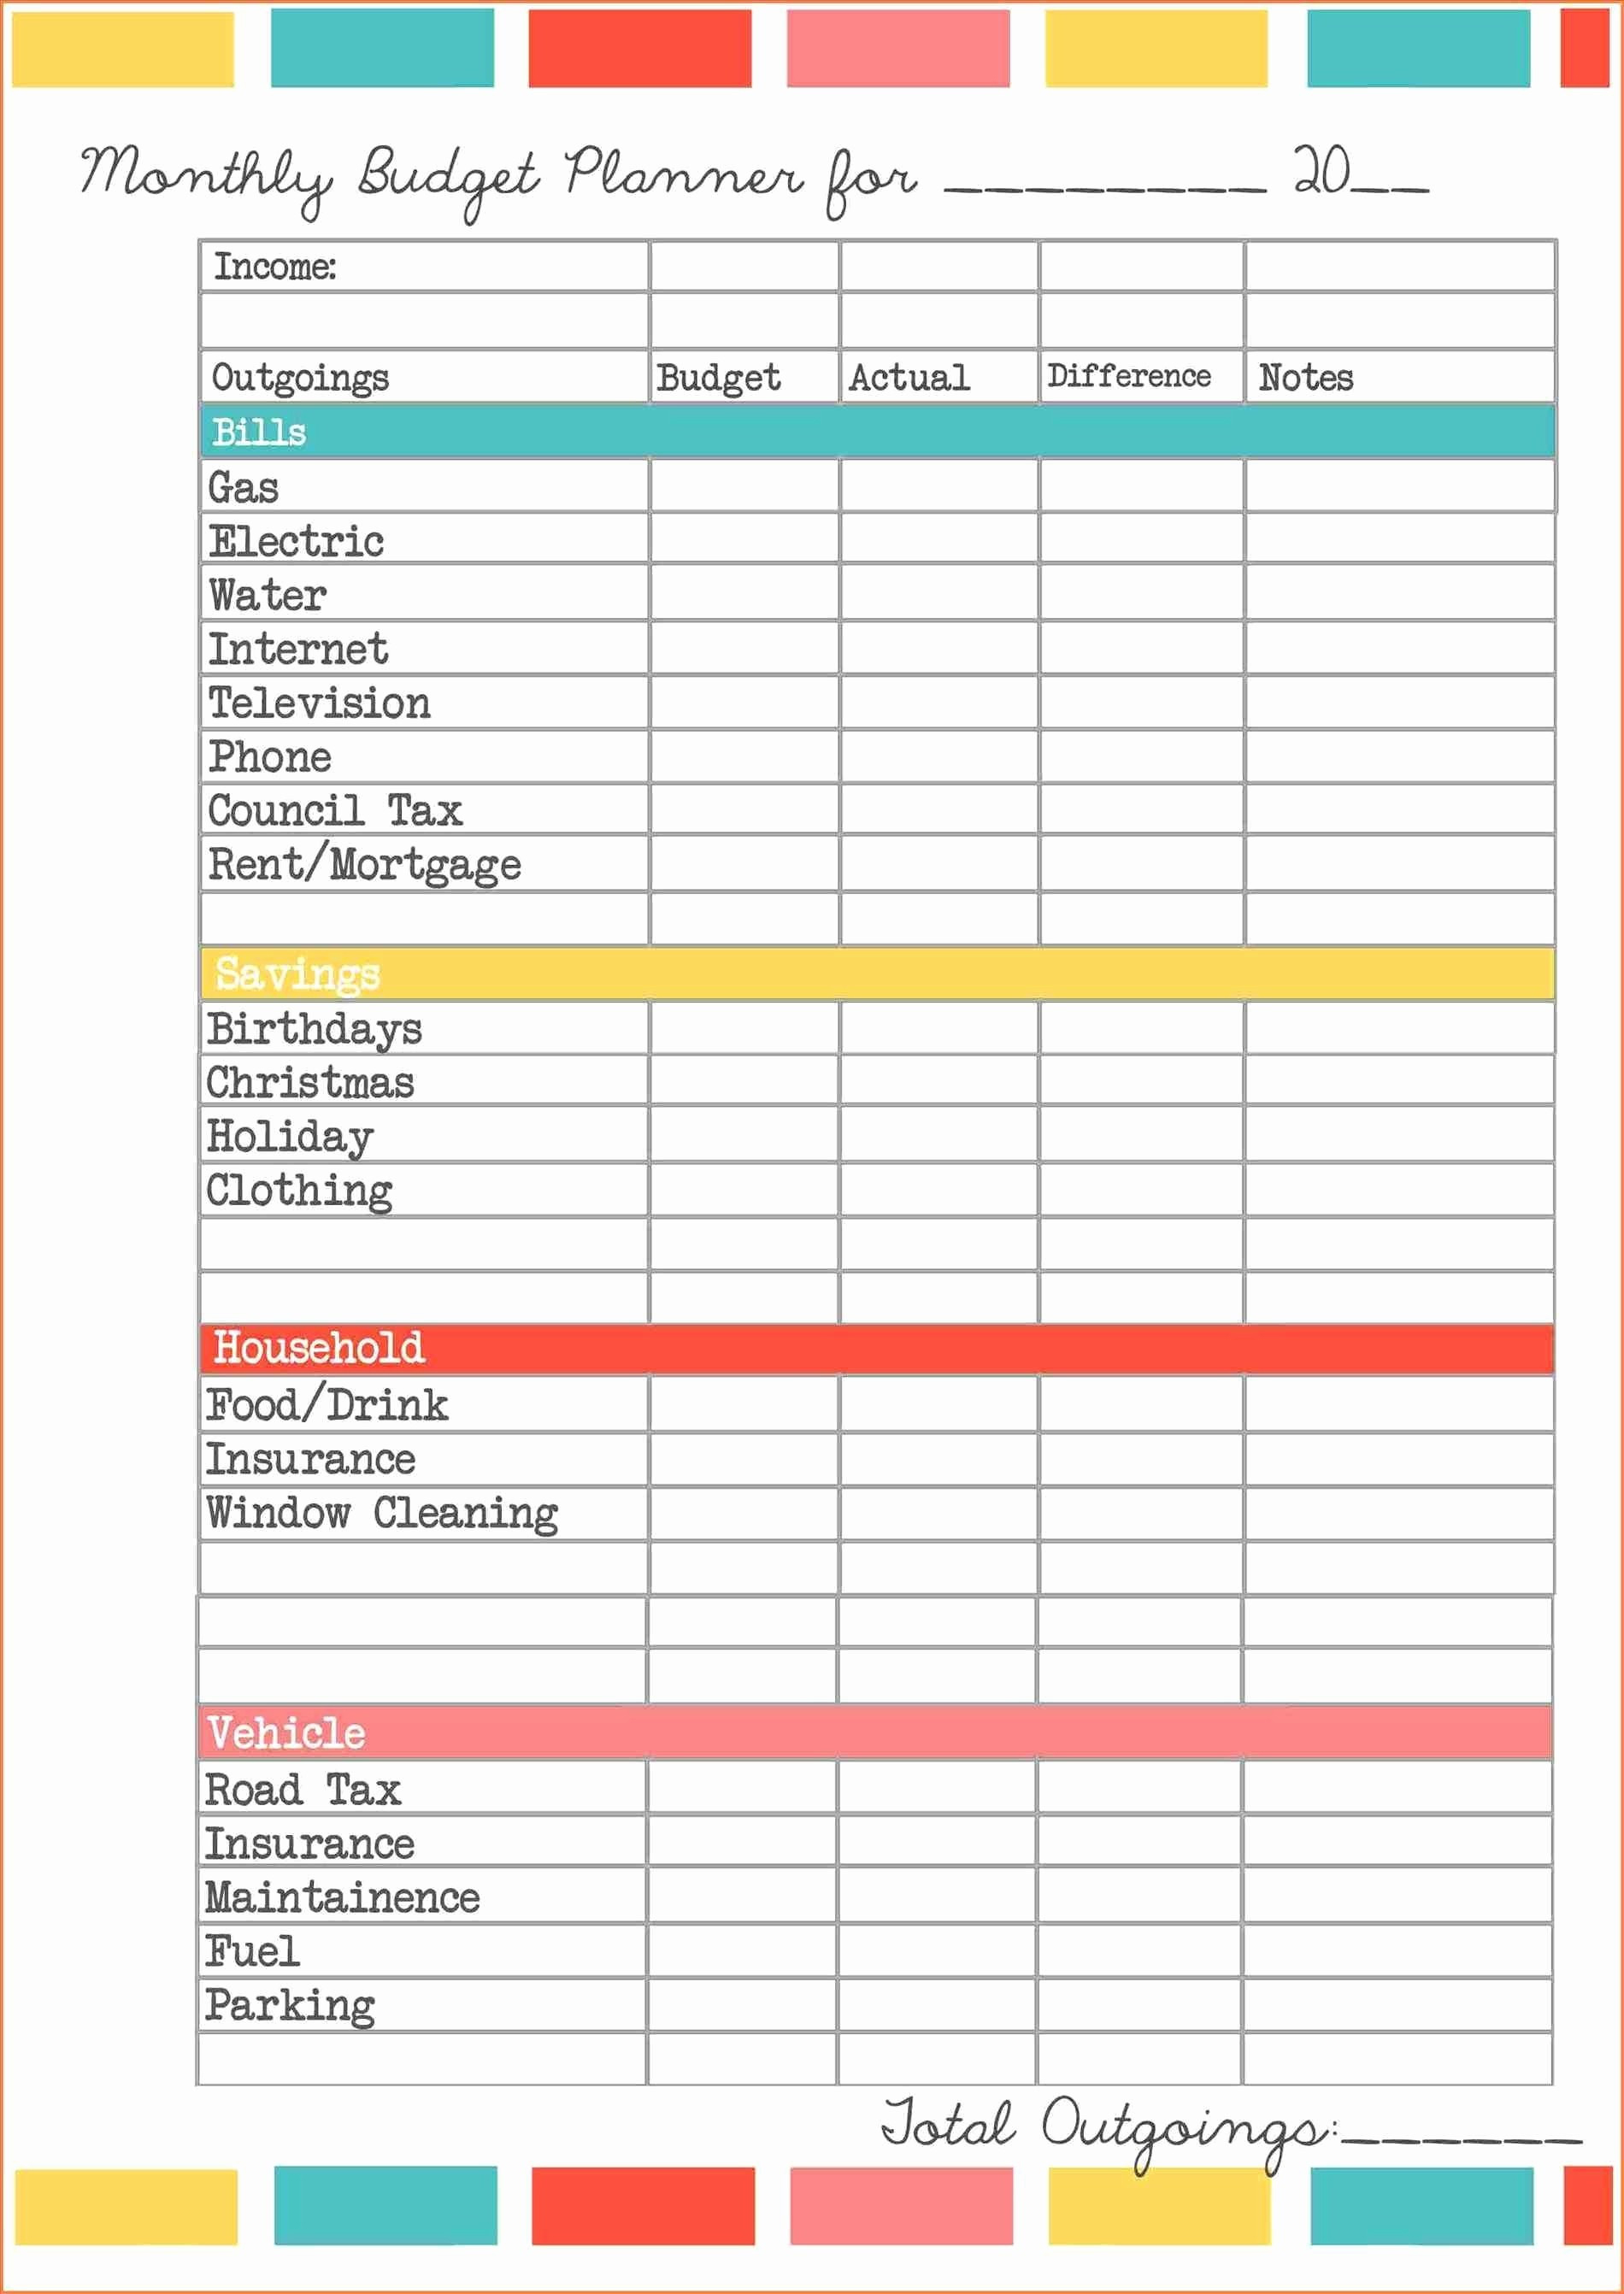 2019 Accounting Spreadsheet Templates For Small Business - Kharazmii With Sample Spreadsheet For Small Business